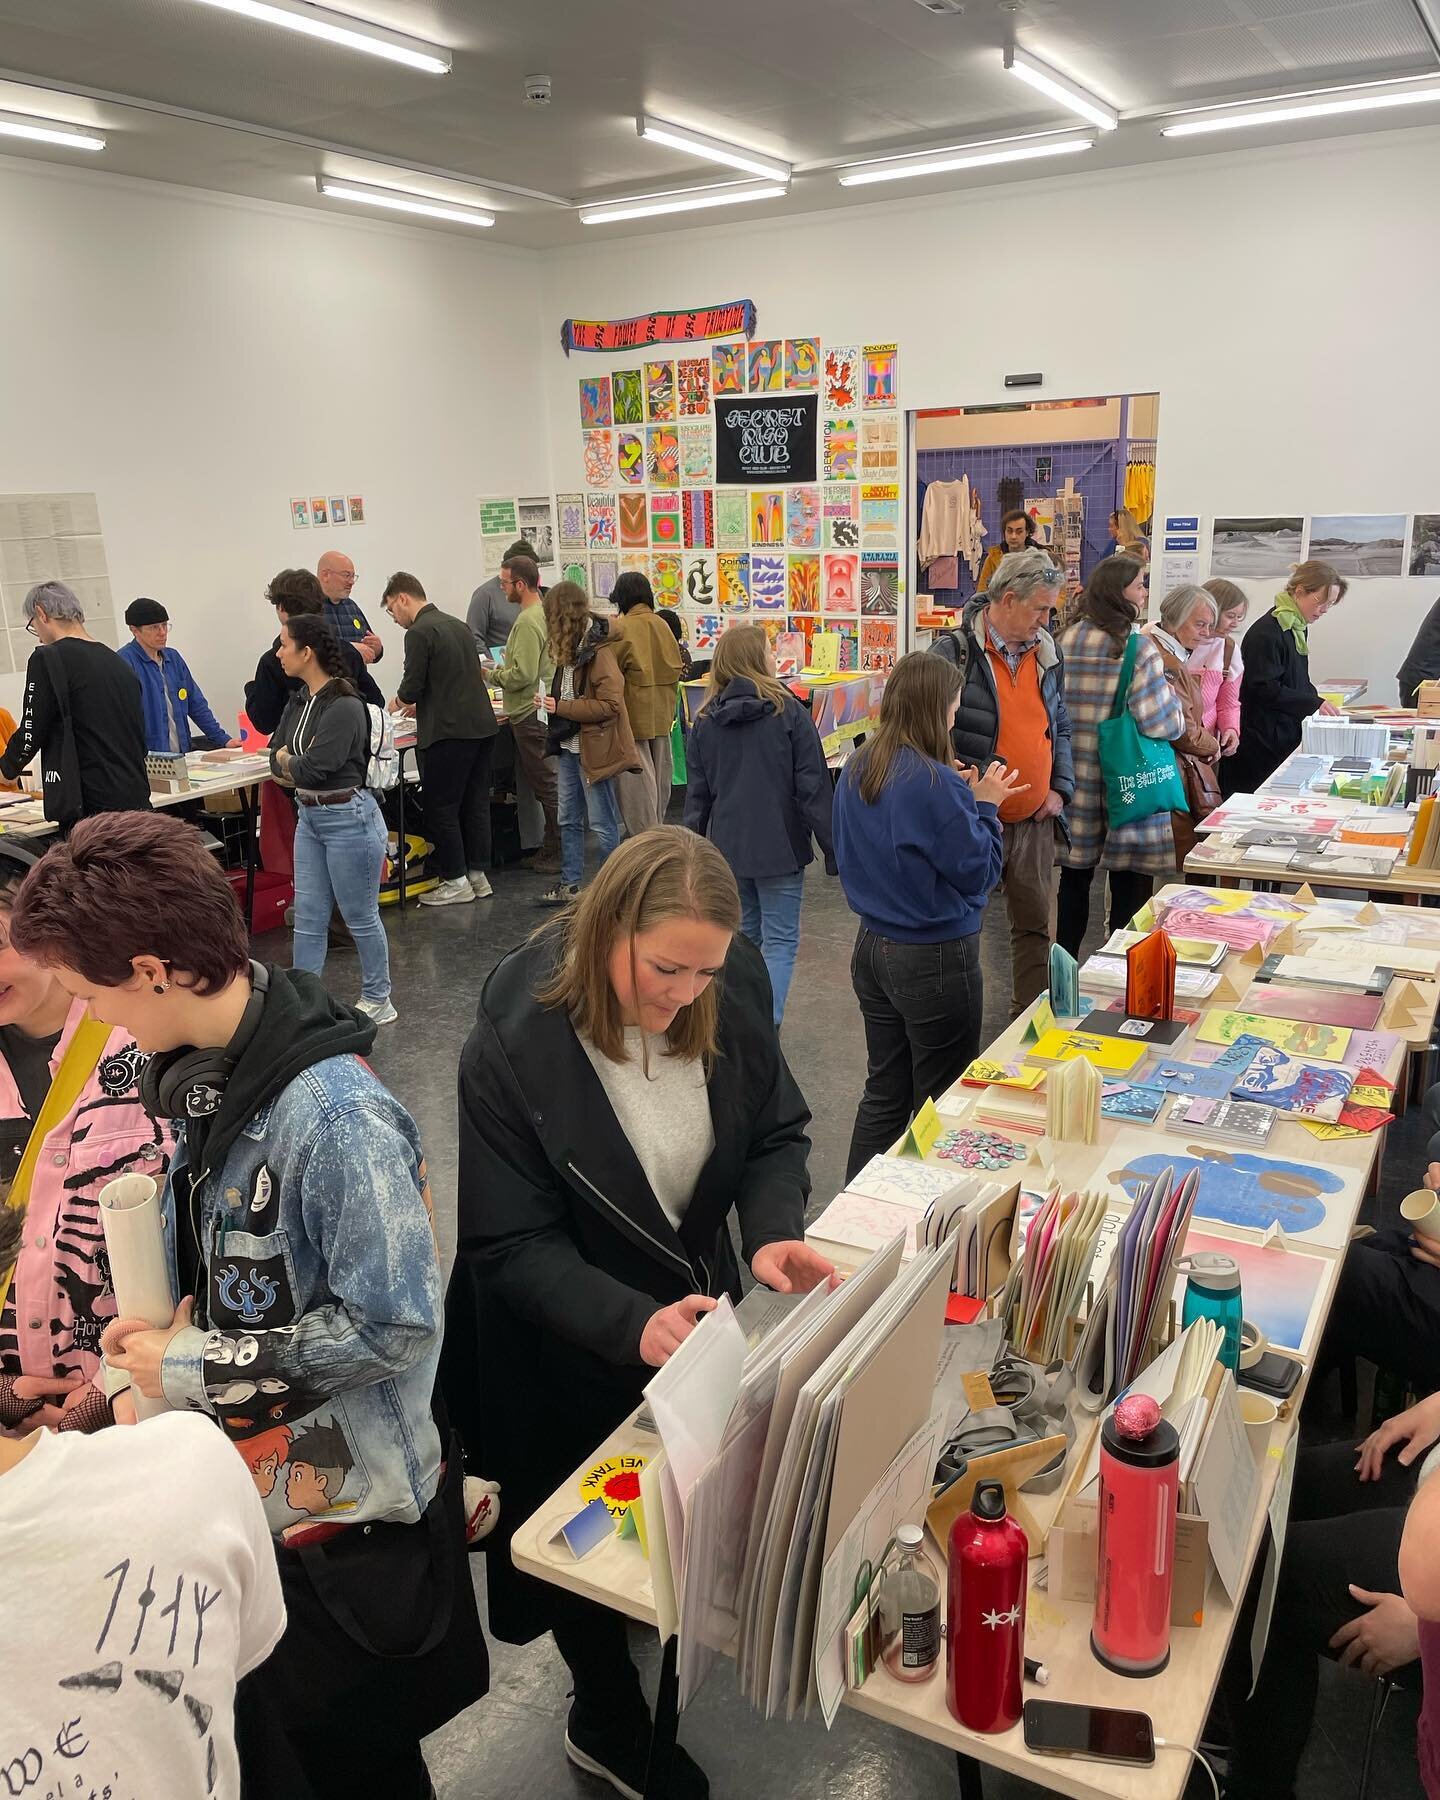 @bergenartbookfair 2023 happening now!!!
Come by @bergenkunsthall today until 17 and/or tomorrow (11-17) if you happen to be in Bergen!

#artbookfair #bergenartbookfair #artistbooks #selfpublishing